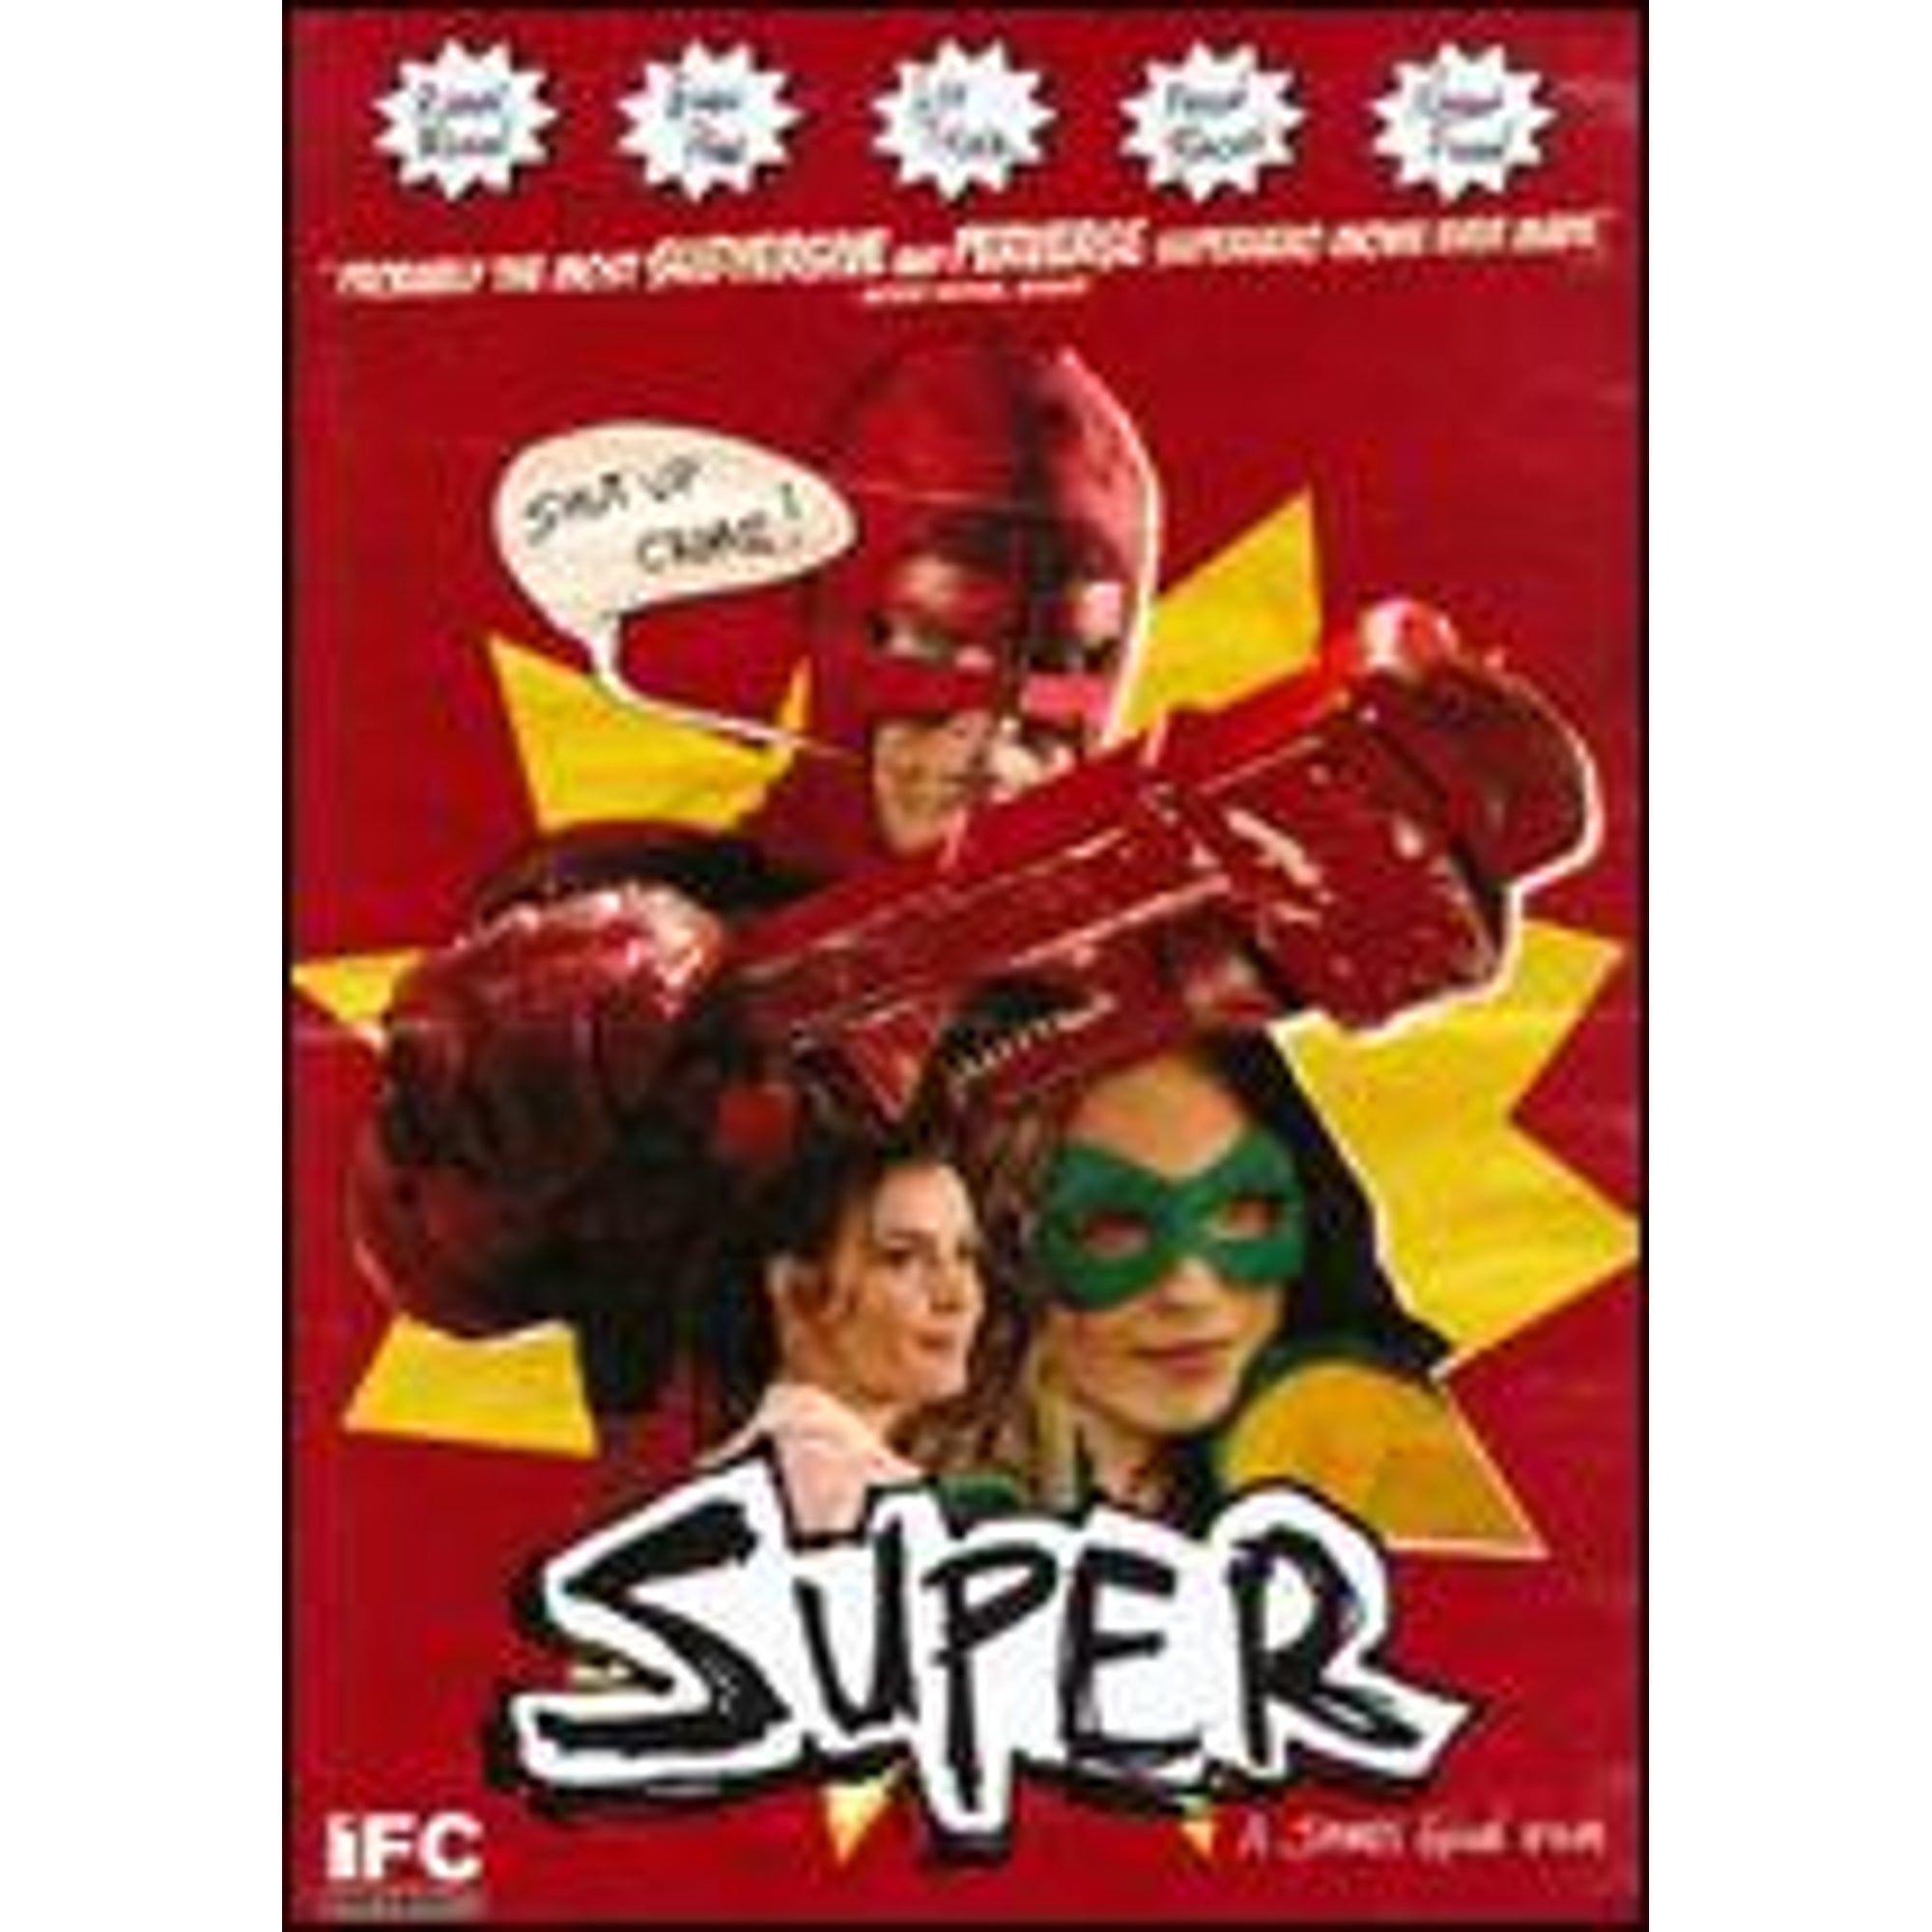 Pre-Owned Super (DVD 0030306978598) directed by James Gunn